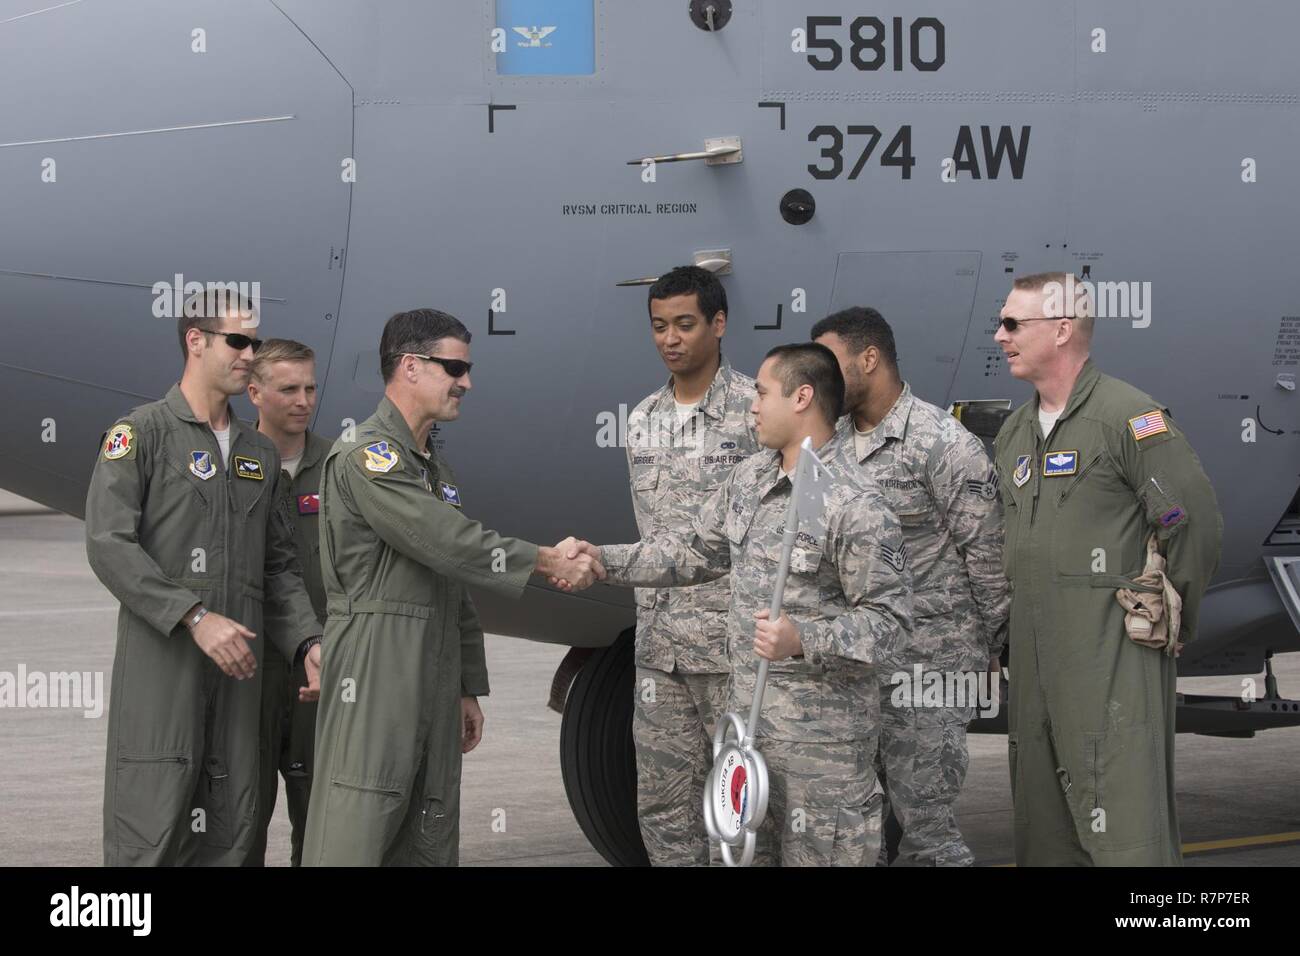 Col. Robert Dotson, 374th Operations Group commander, and Staff Sgt. Raymond Malig, 374th Aircraft Maintenance Squadron crew chief, shake hands in front of a C-130J Super Hercules at Yokota Air Base, Japan, March 29, 2017. This is the second C-130J delivered from Lockheed Martin, less than a month after the first was delivered March 6th. Yokota serves as the primary Western Pacific airlift hub for U.S. Air Force peacetime and contingency operations. Missions included tactical air land, airdrop, aeromedical evacuation, special operations and distinguished visitor airlift. Stock Photo